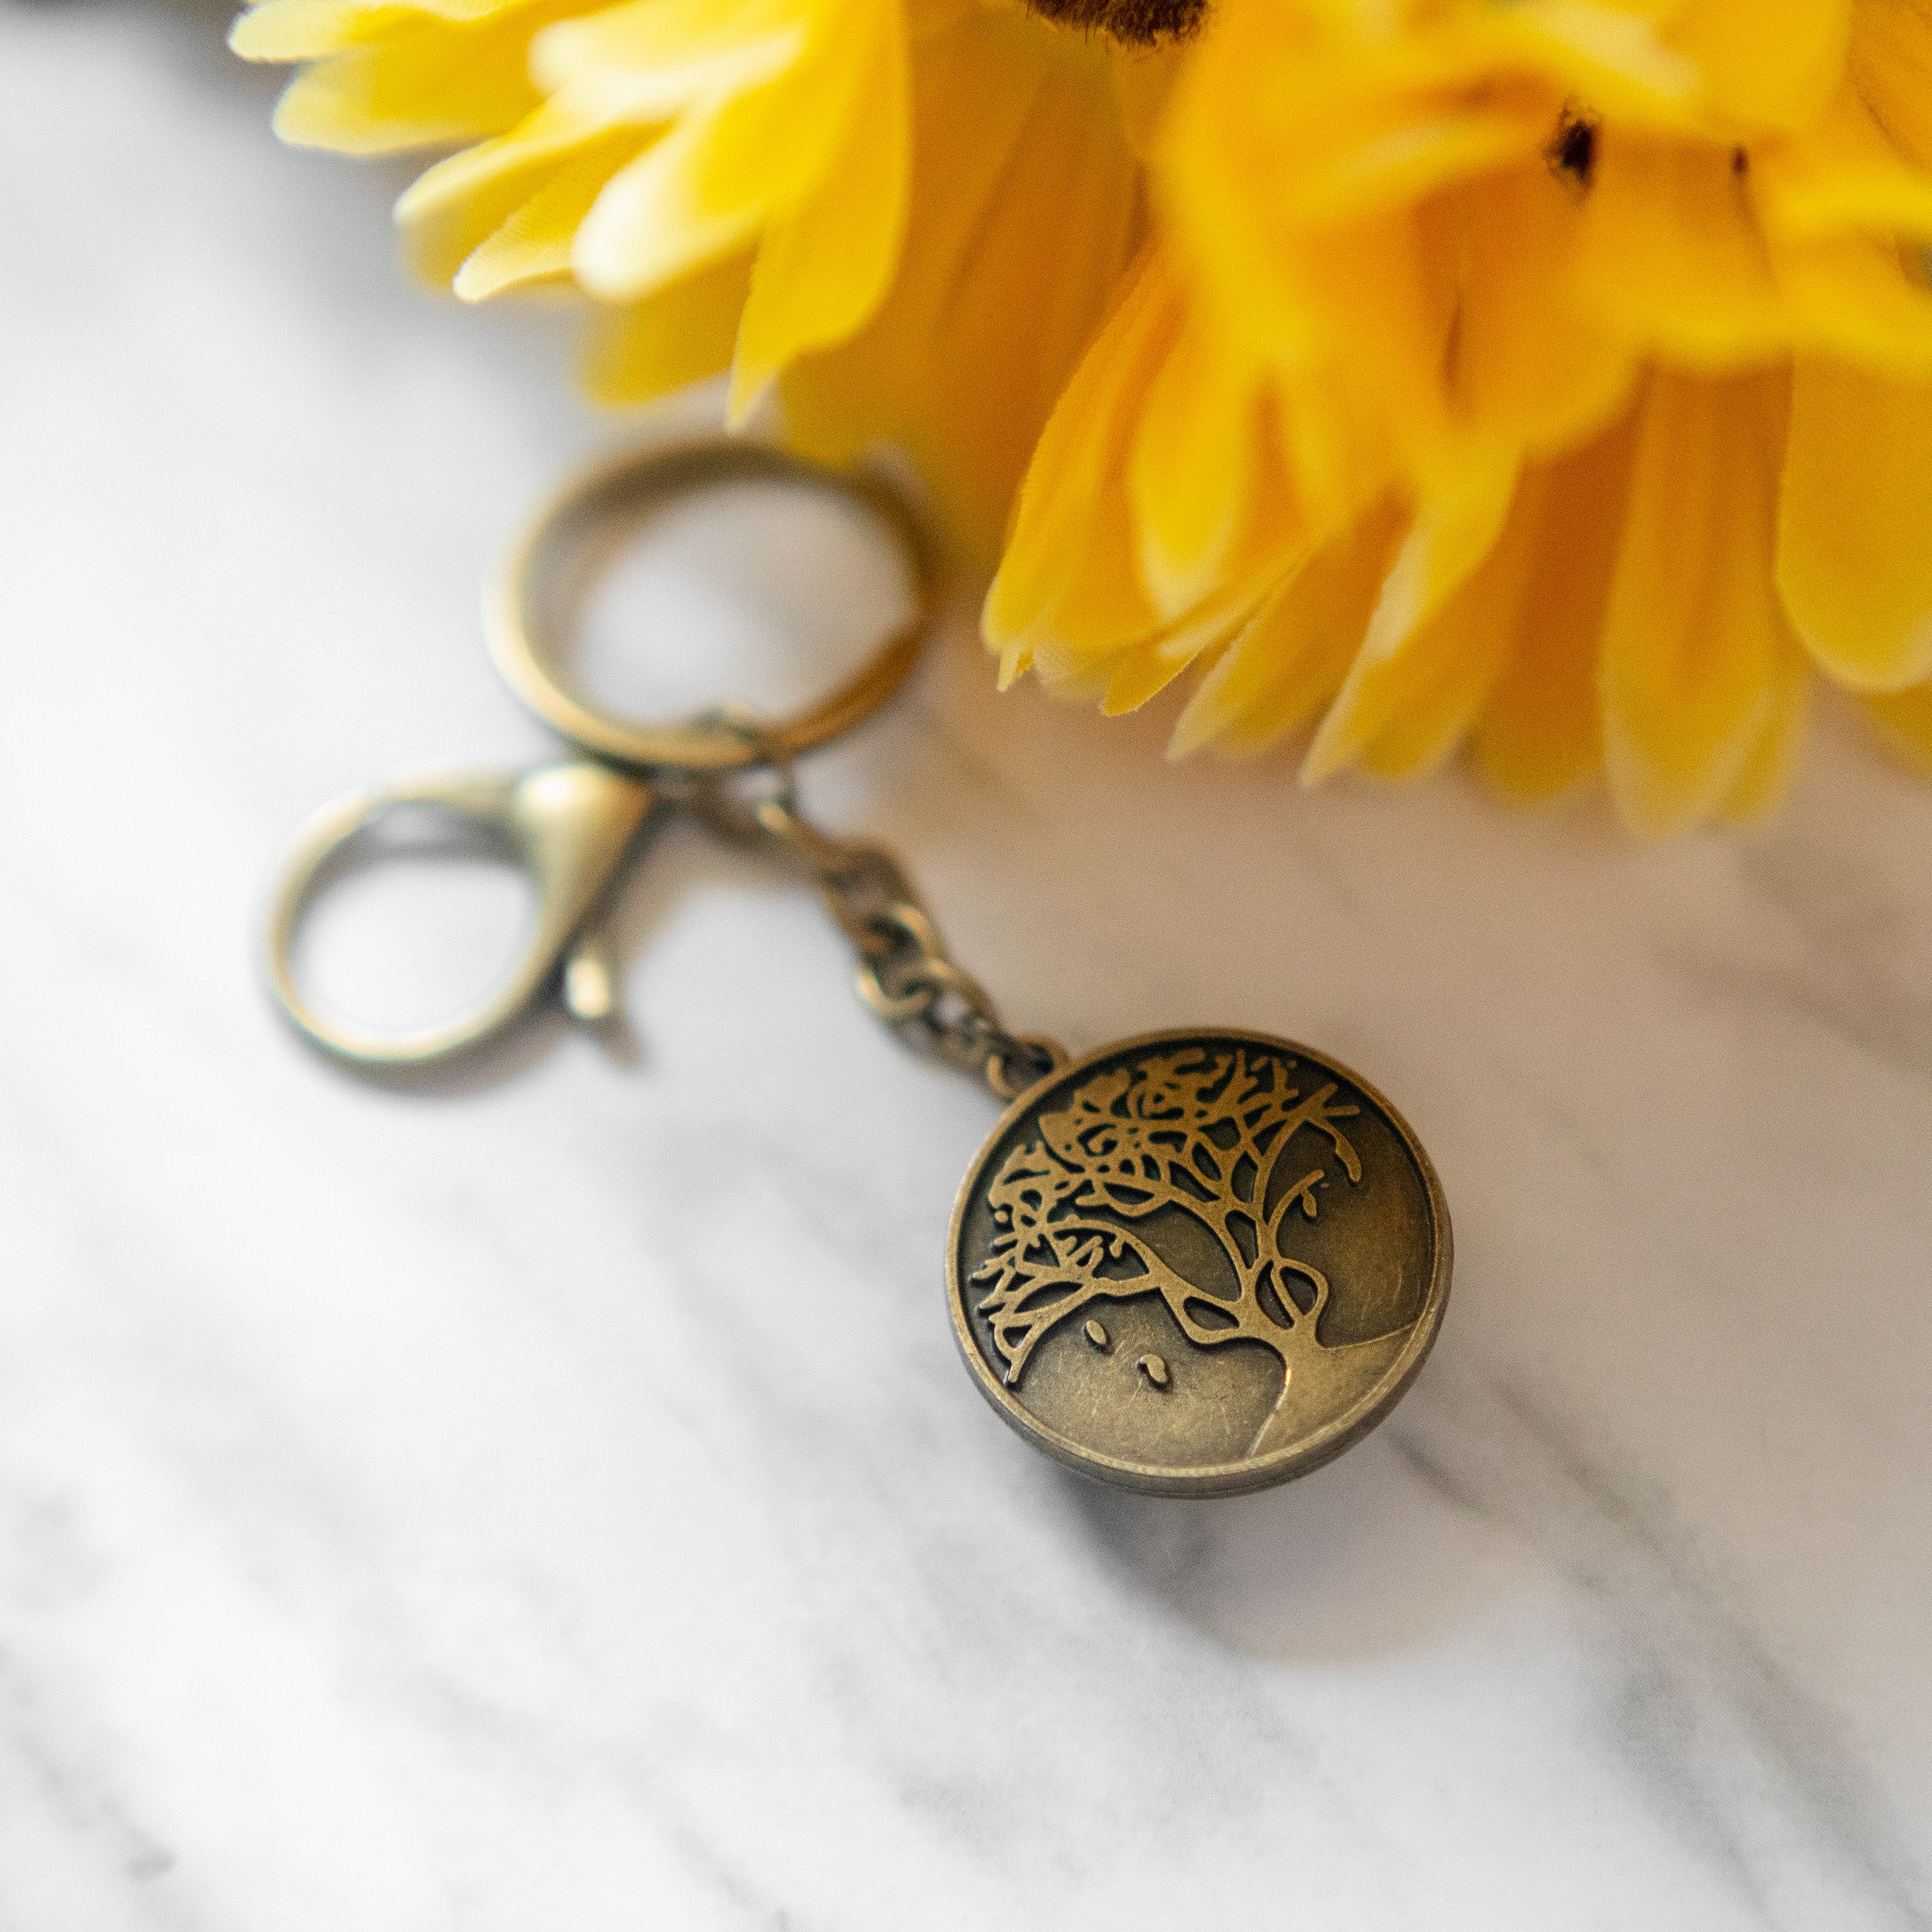 Real Pressed Flower Resin Keychain with Daisy and Lace Floral Neverland Floralfy 04